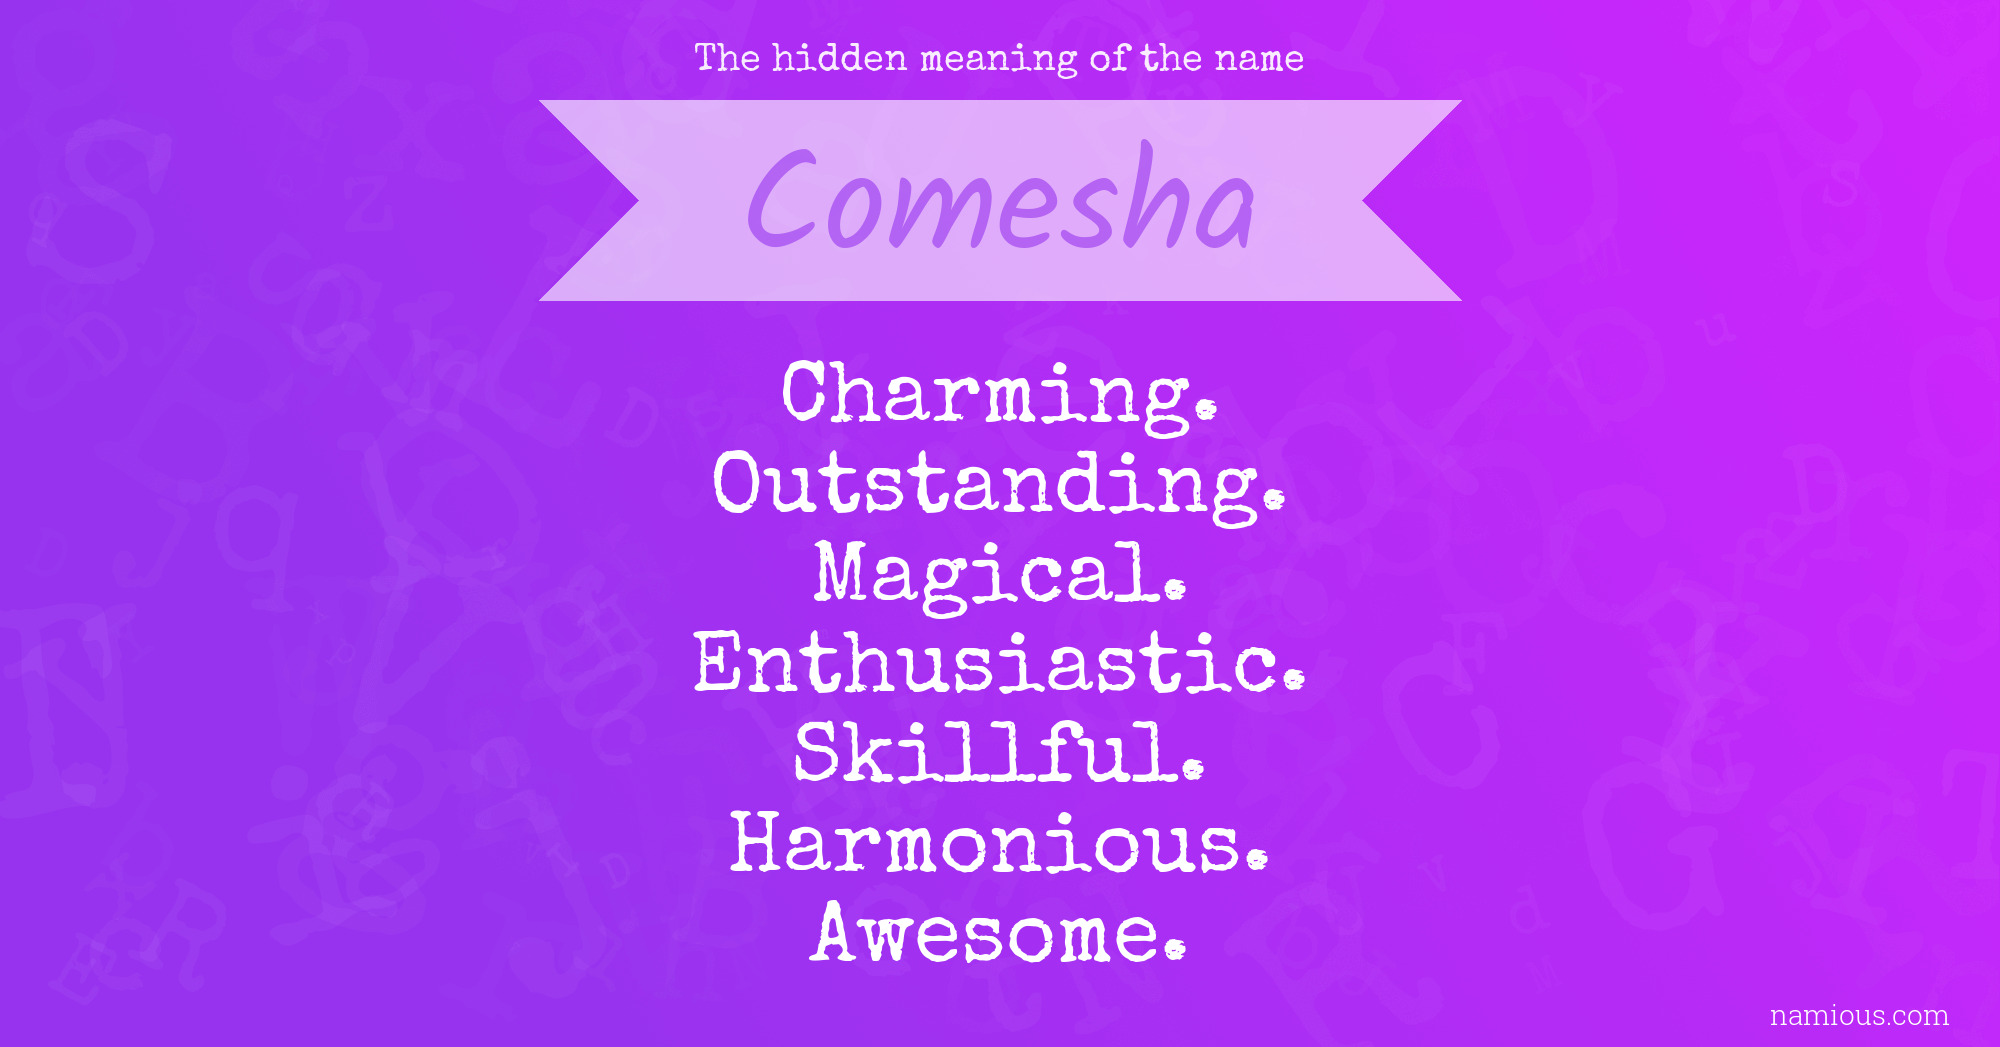 The hidden meaning of the name Comesha